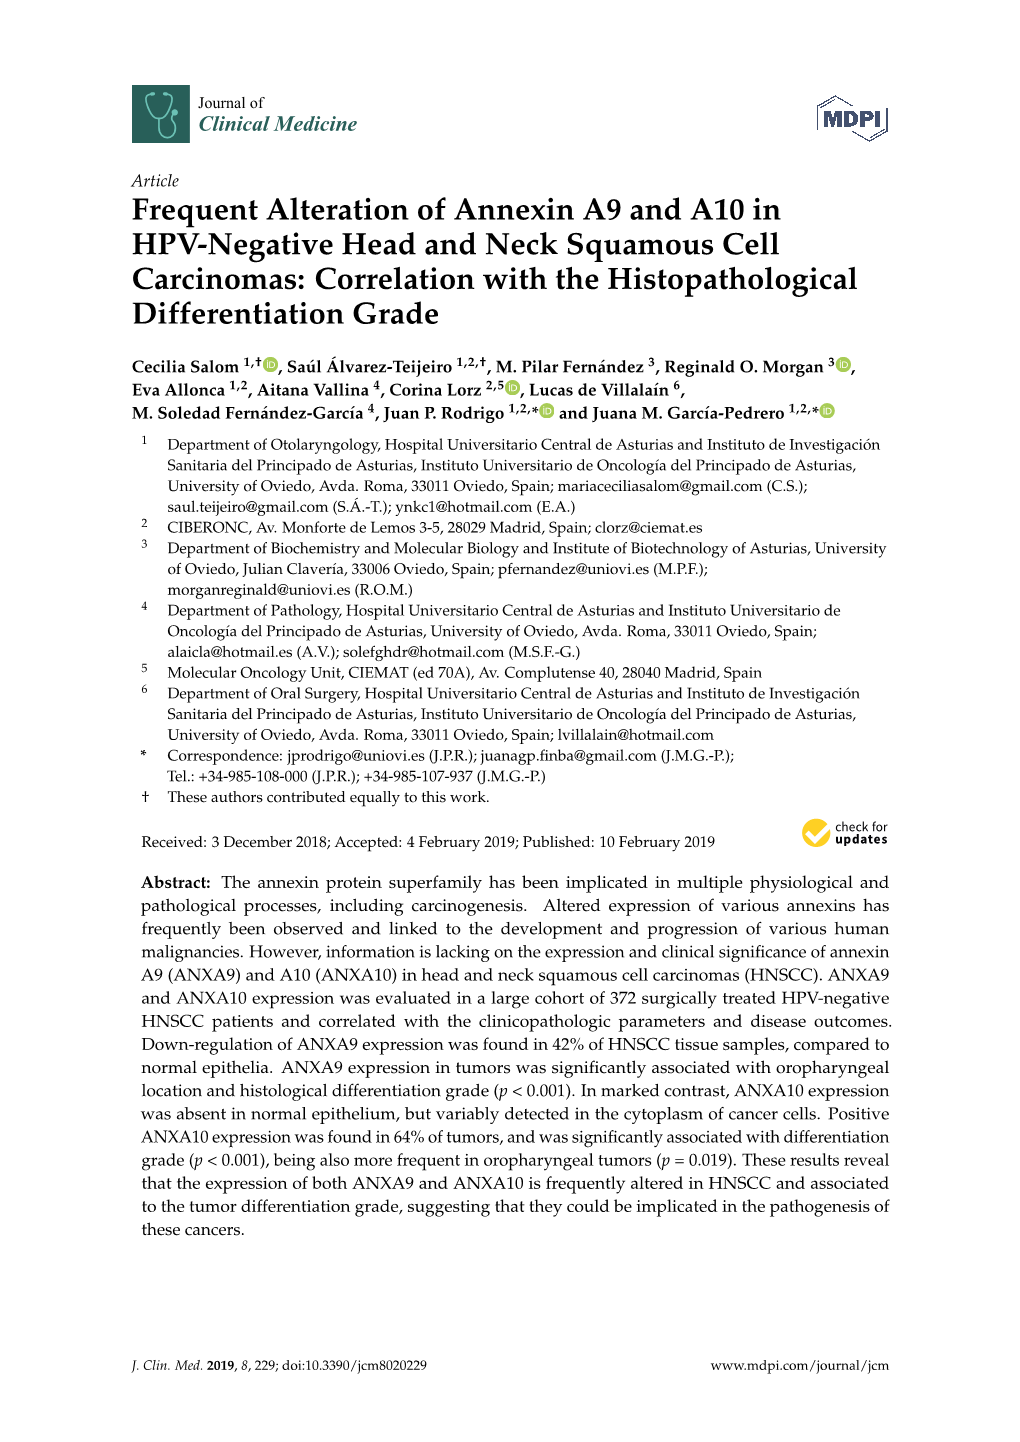 Frequent Alteration of Annexin A9 and A10 in HPV-Negative Head and Neck Squamous Cell Carcinomas: Correlation with the Histopathological Differentiation Grade